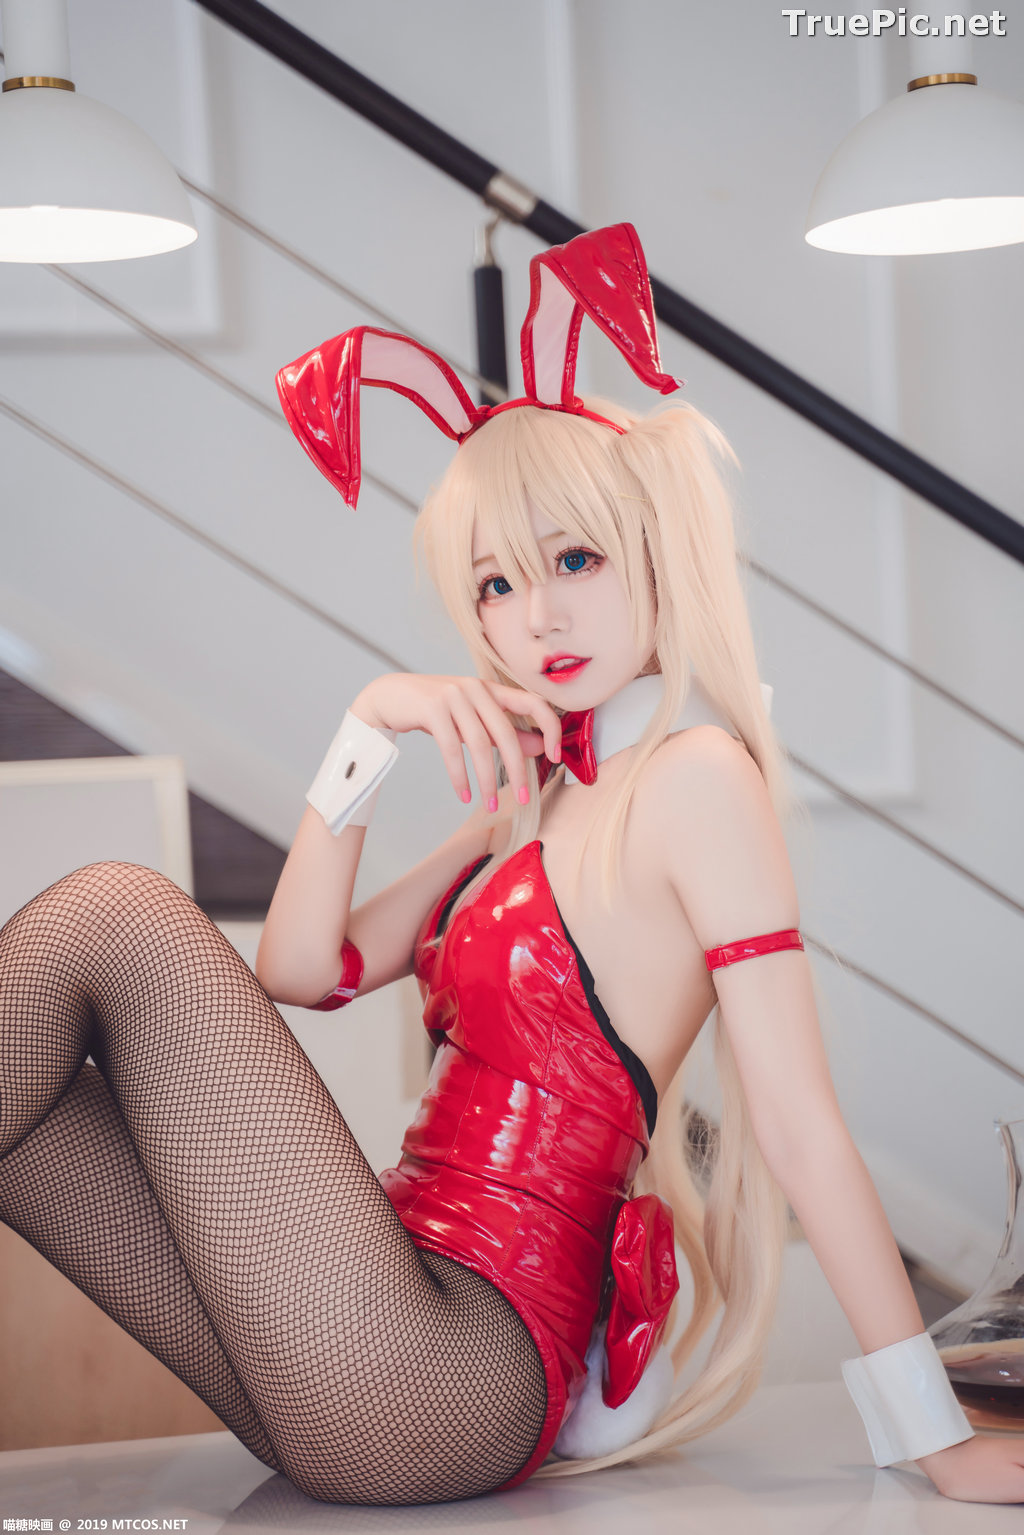 Image [MTCos] 喵糖映画 Vol.021 – Chinese Cute Model – Red Bunny Girl Cosplay - TruePic.net - Picture-15